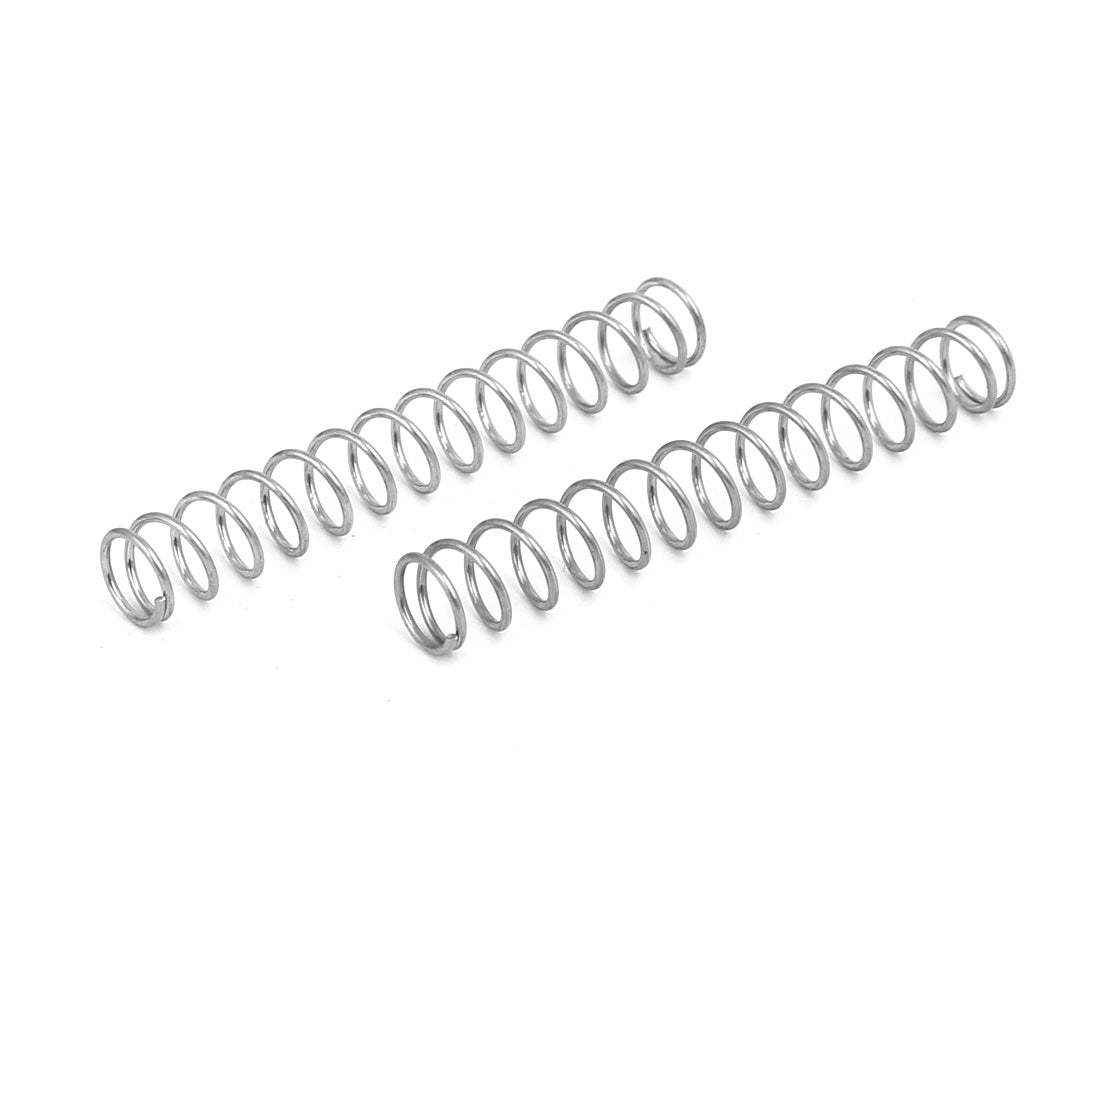 uxcell Uxcell 0.7mmx7mmx50mm 304 Stainless Steel Compression Springs Silver Tone 10pcs